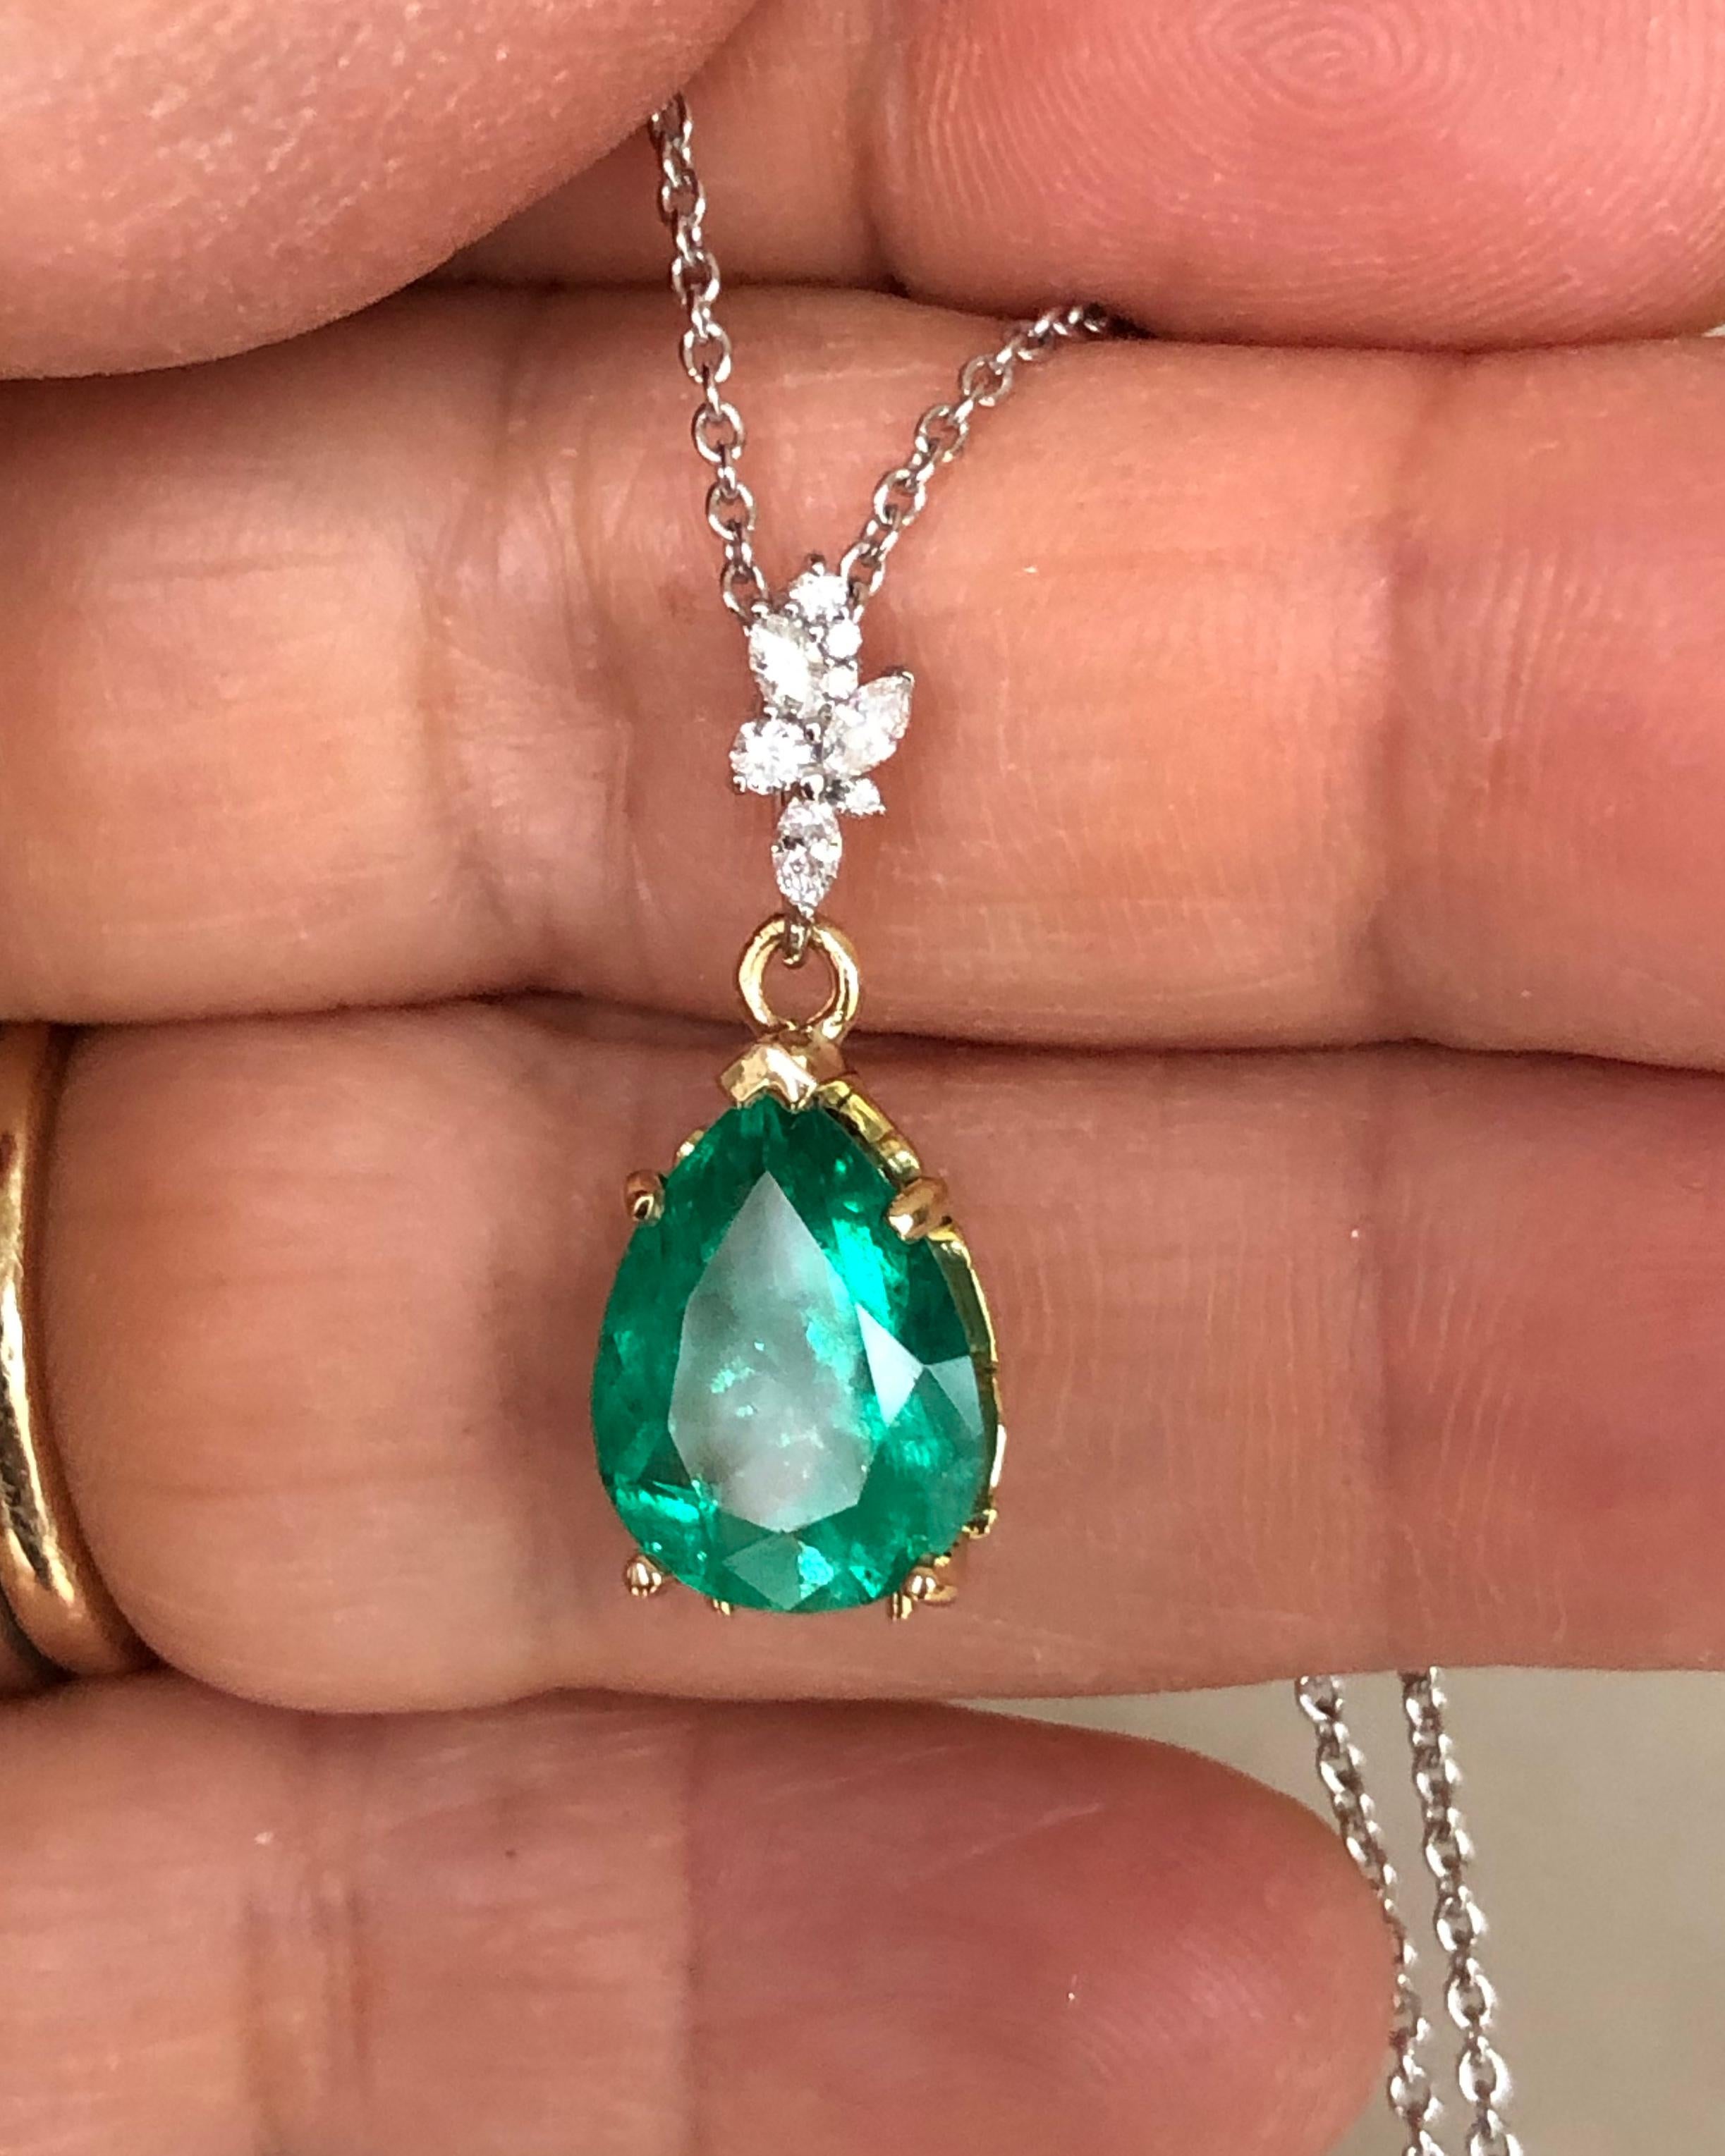 Elegant and Classic Drop Pendant Necklace featuring in the center a fine pear cut Colombian emerald weighing 3.73 carats. It has a CDTEC certificate stating that it is Colombian, and has minor traditional enhancement. The emerald is set in a